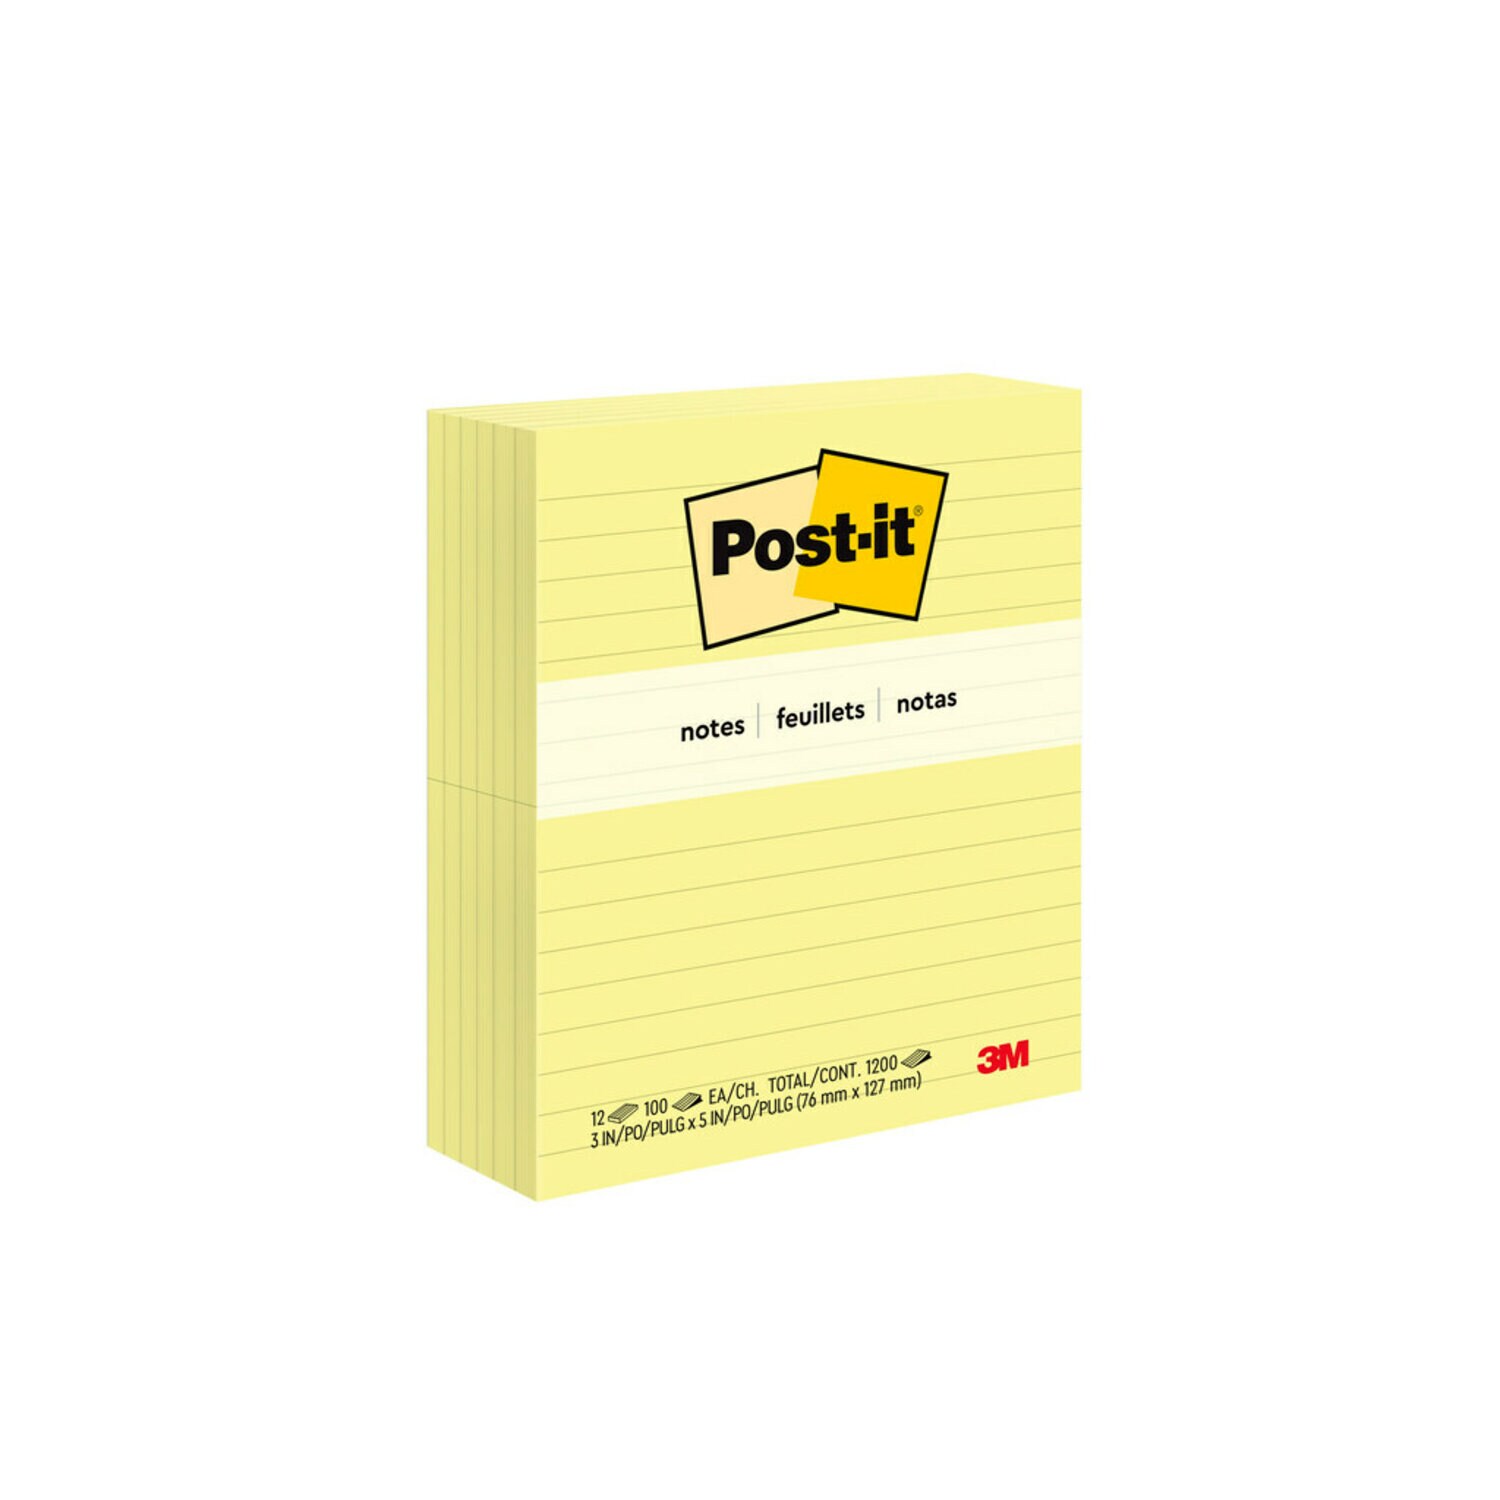 7100229247 - Post-it Notes 635, 3 in x 5 in (76 mm x 127 mm)